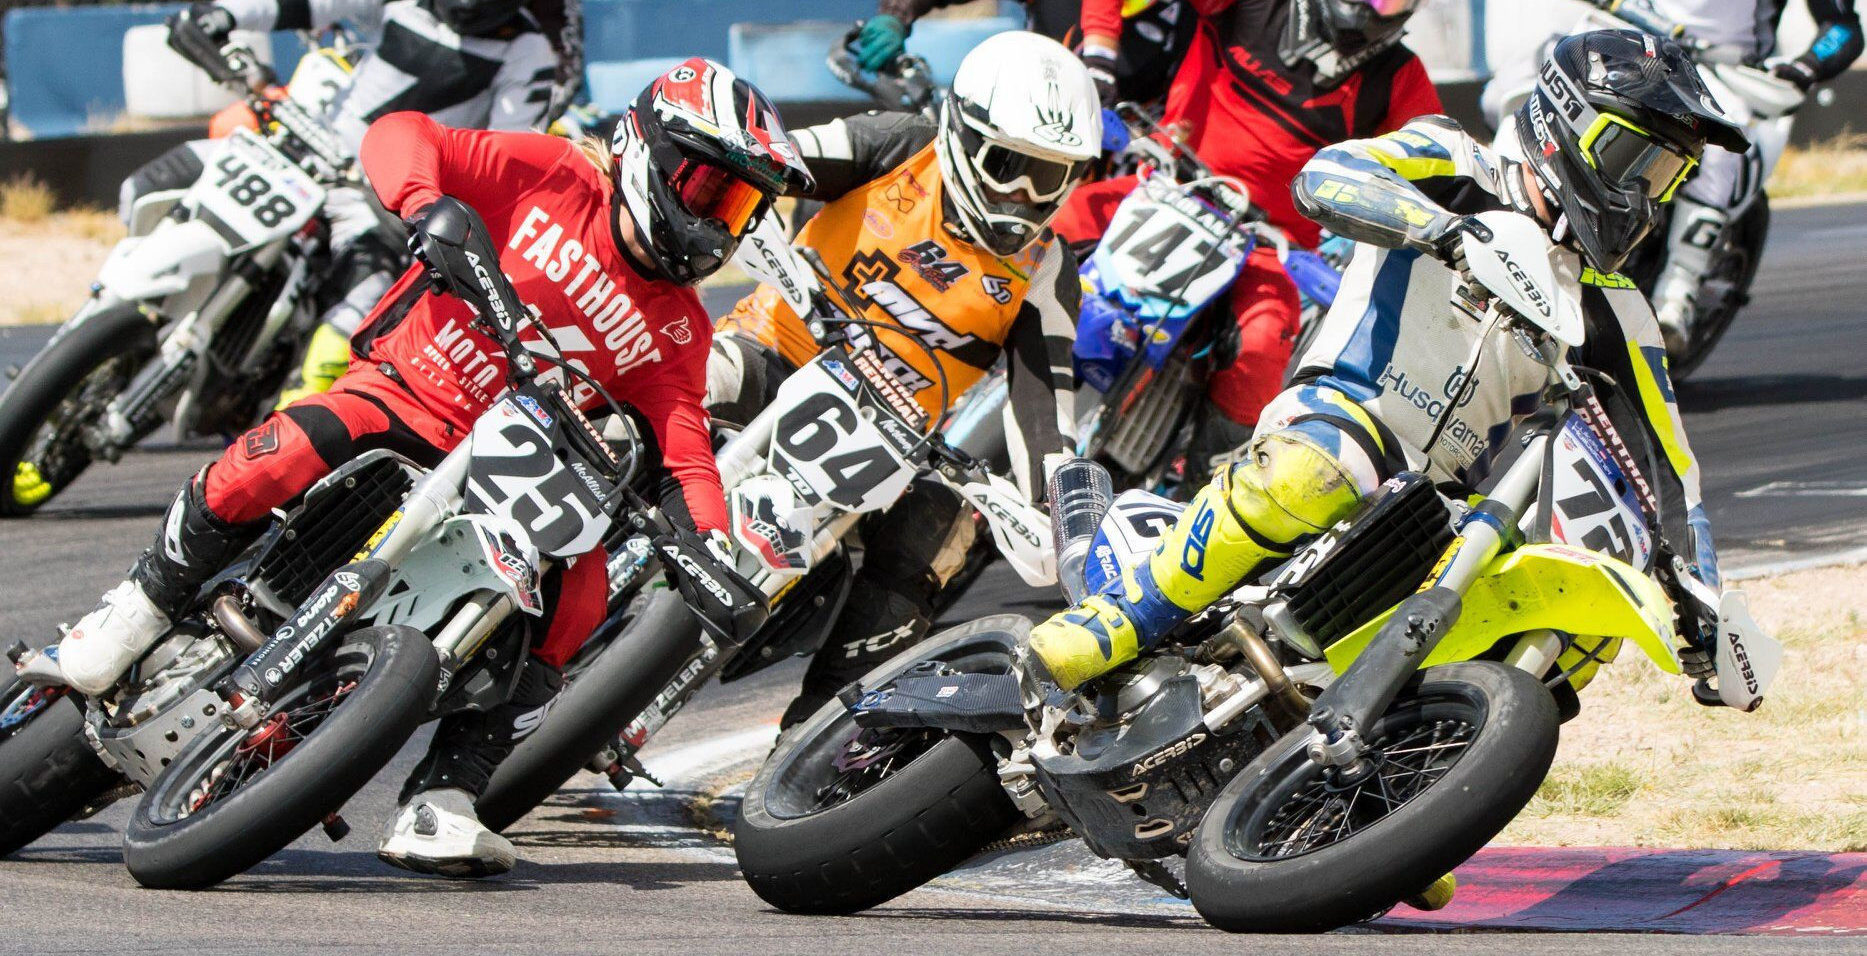 Action from an AMA Supermoto event. Photo courtesy of AMA Supermoto.